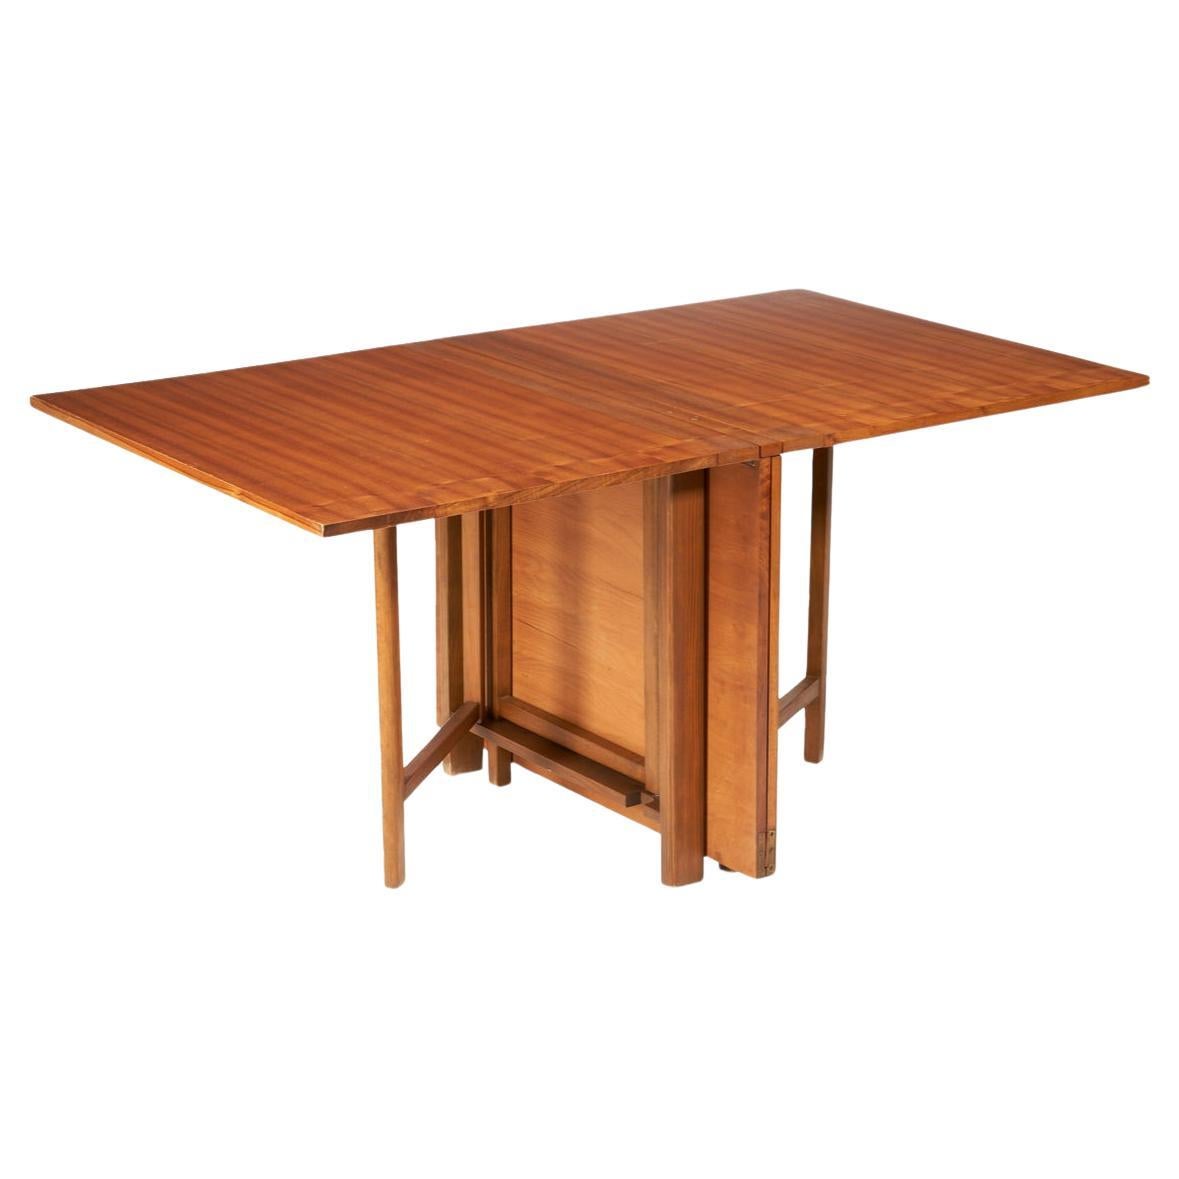 Mid-Century Modern Maria folding extension dining table designed by Bruno Mathsson. Table is Teak wood brown finish with brass hardware. Good vintage condition. Table folds down very small to stow away while not using. Made in Sweden. Located in